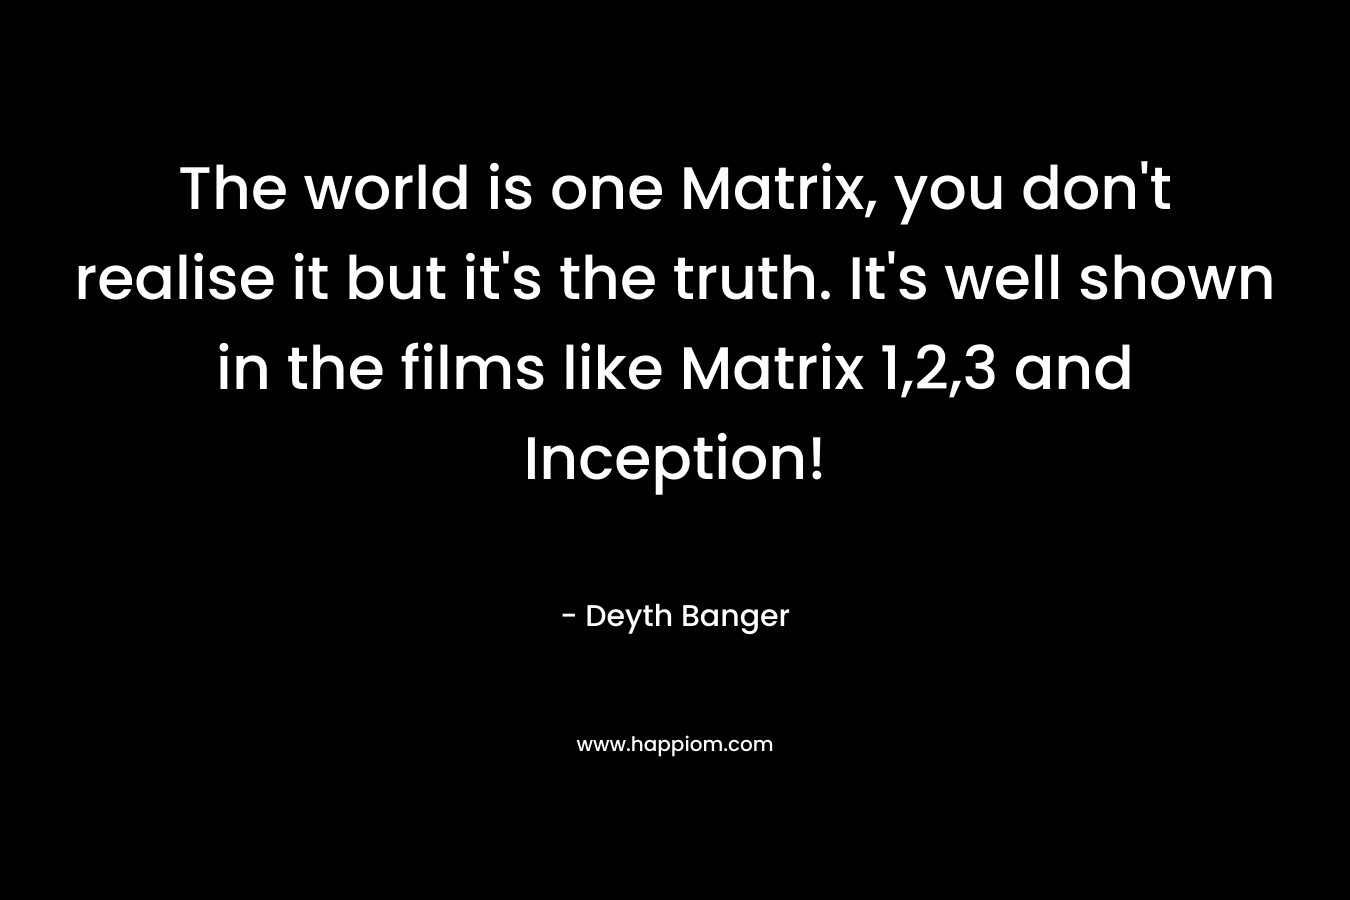 The world is one Matrix, you don’t realise it but it’s the truth. It’s well shown in the films like Matrix 1,2,3 and Inception! – Deyth Banger